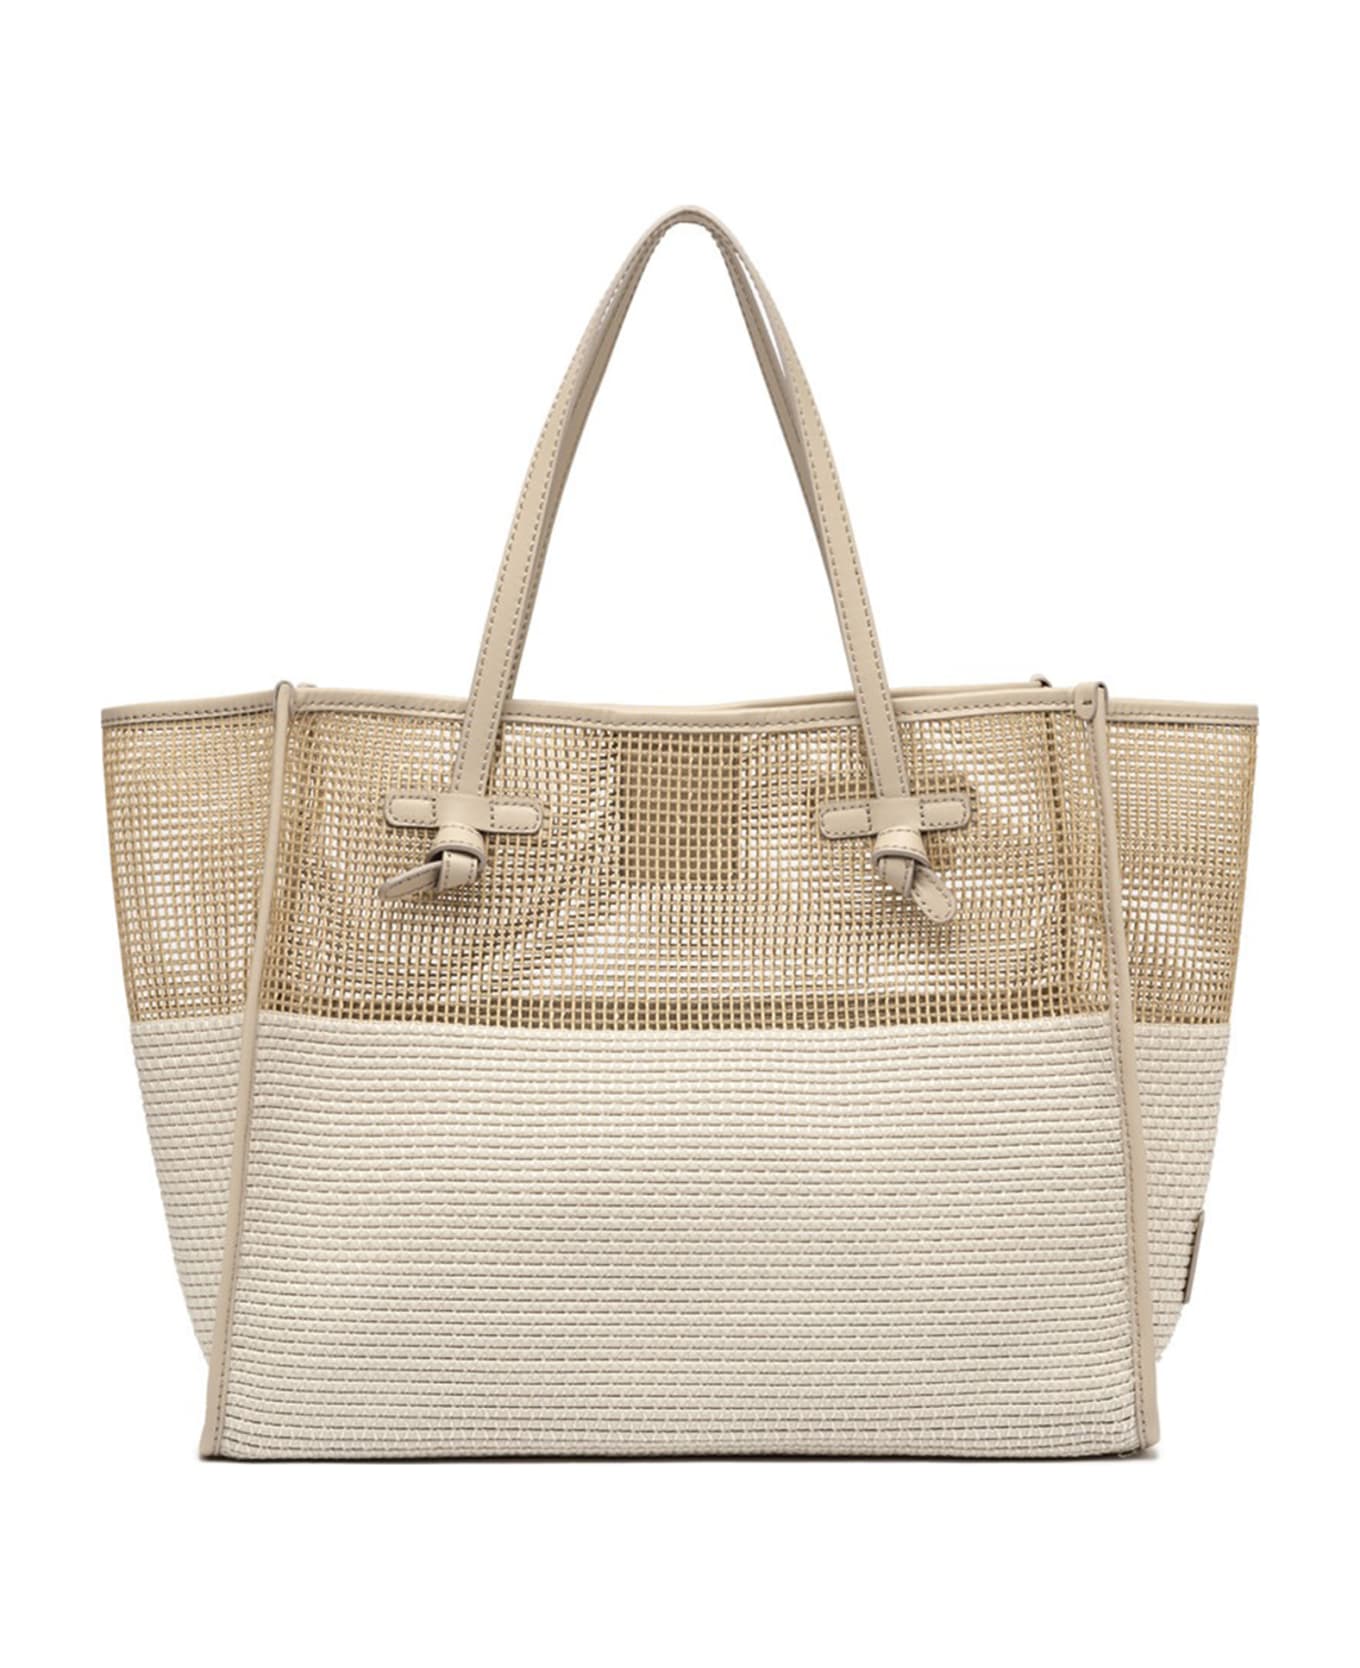 Gianni Chiarini Marcella Shopping Bag In Two-color Mesh Effect Fabric - PANNA トートバッグ